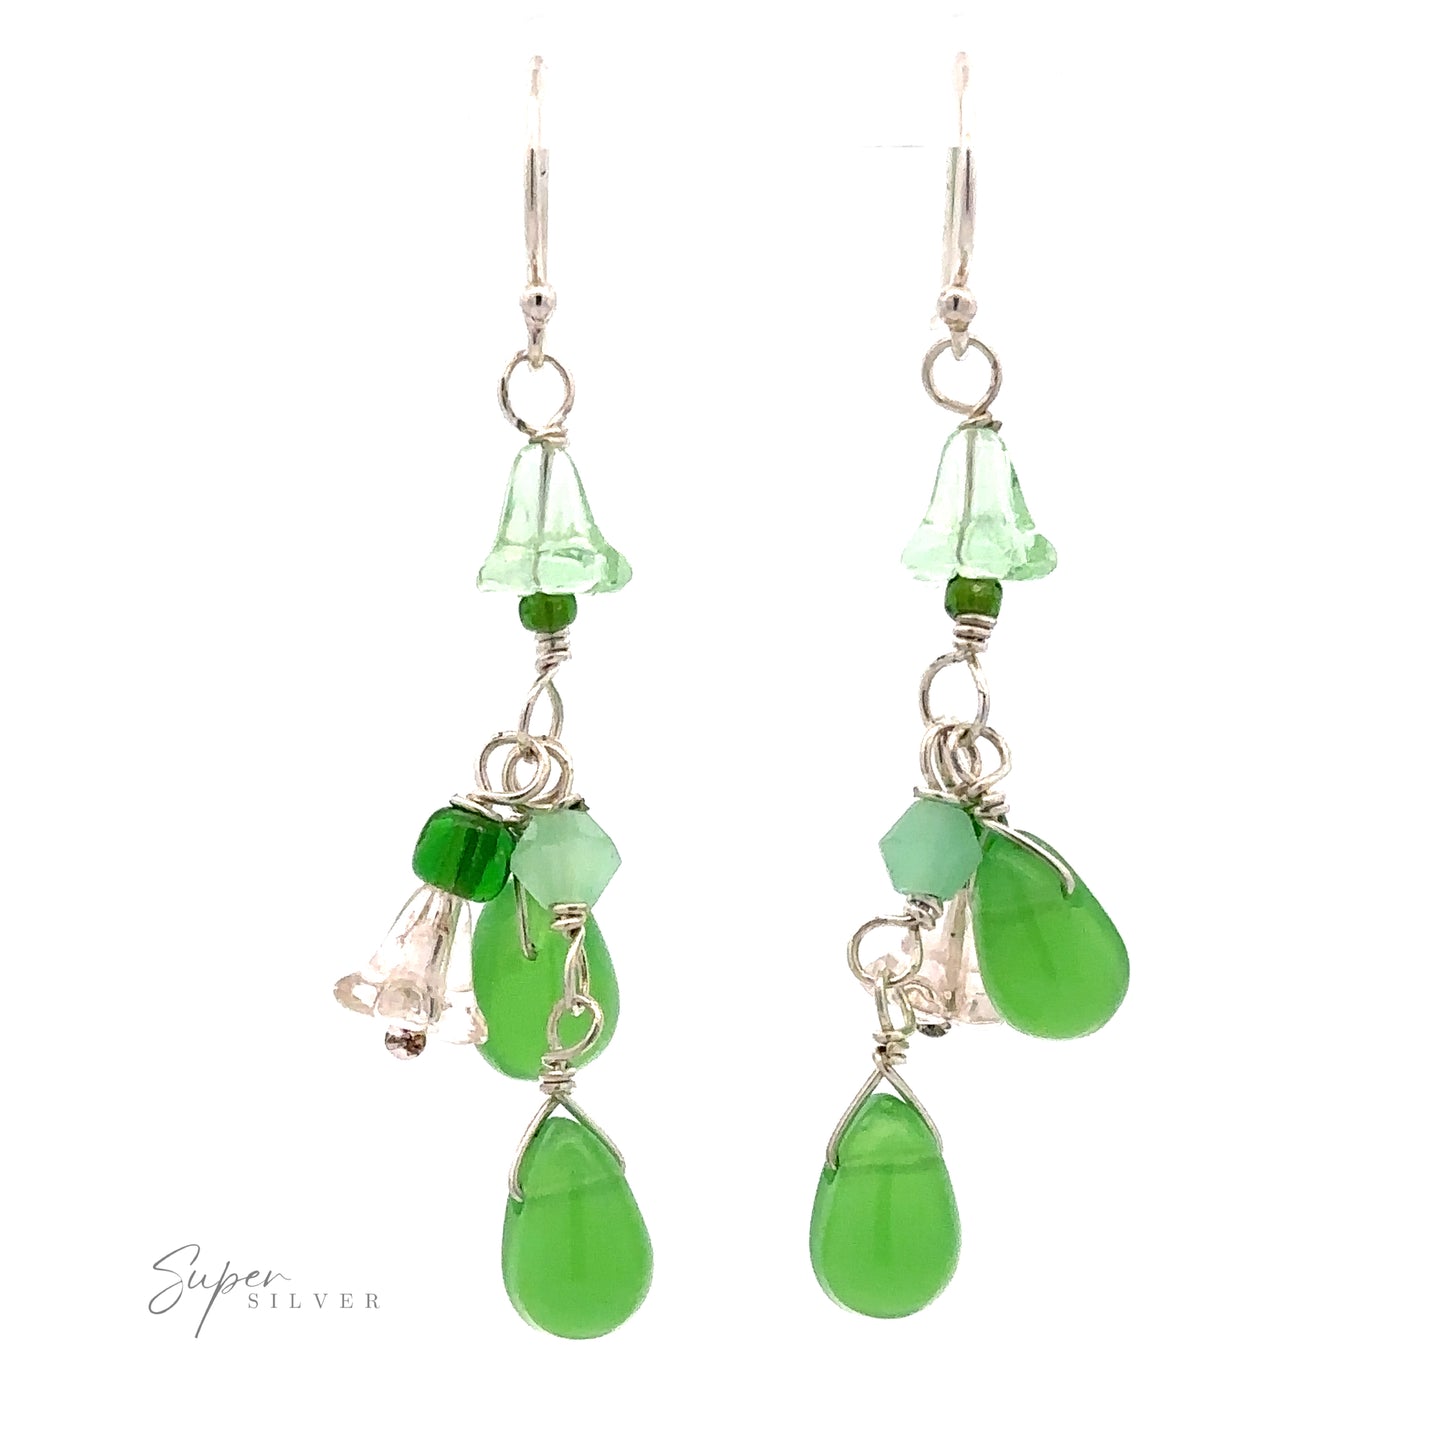 
                  
                    A pair of Playful Green Dangle Earrings crafted from .925 Sterling Silver, featuring green teardrop and flower-shaped beads, accented by smaller clear and multicolored beads.
                  
                